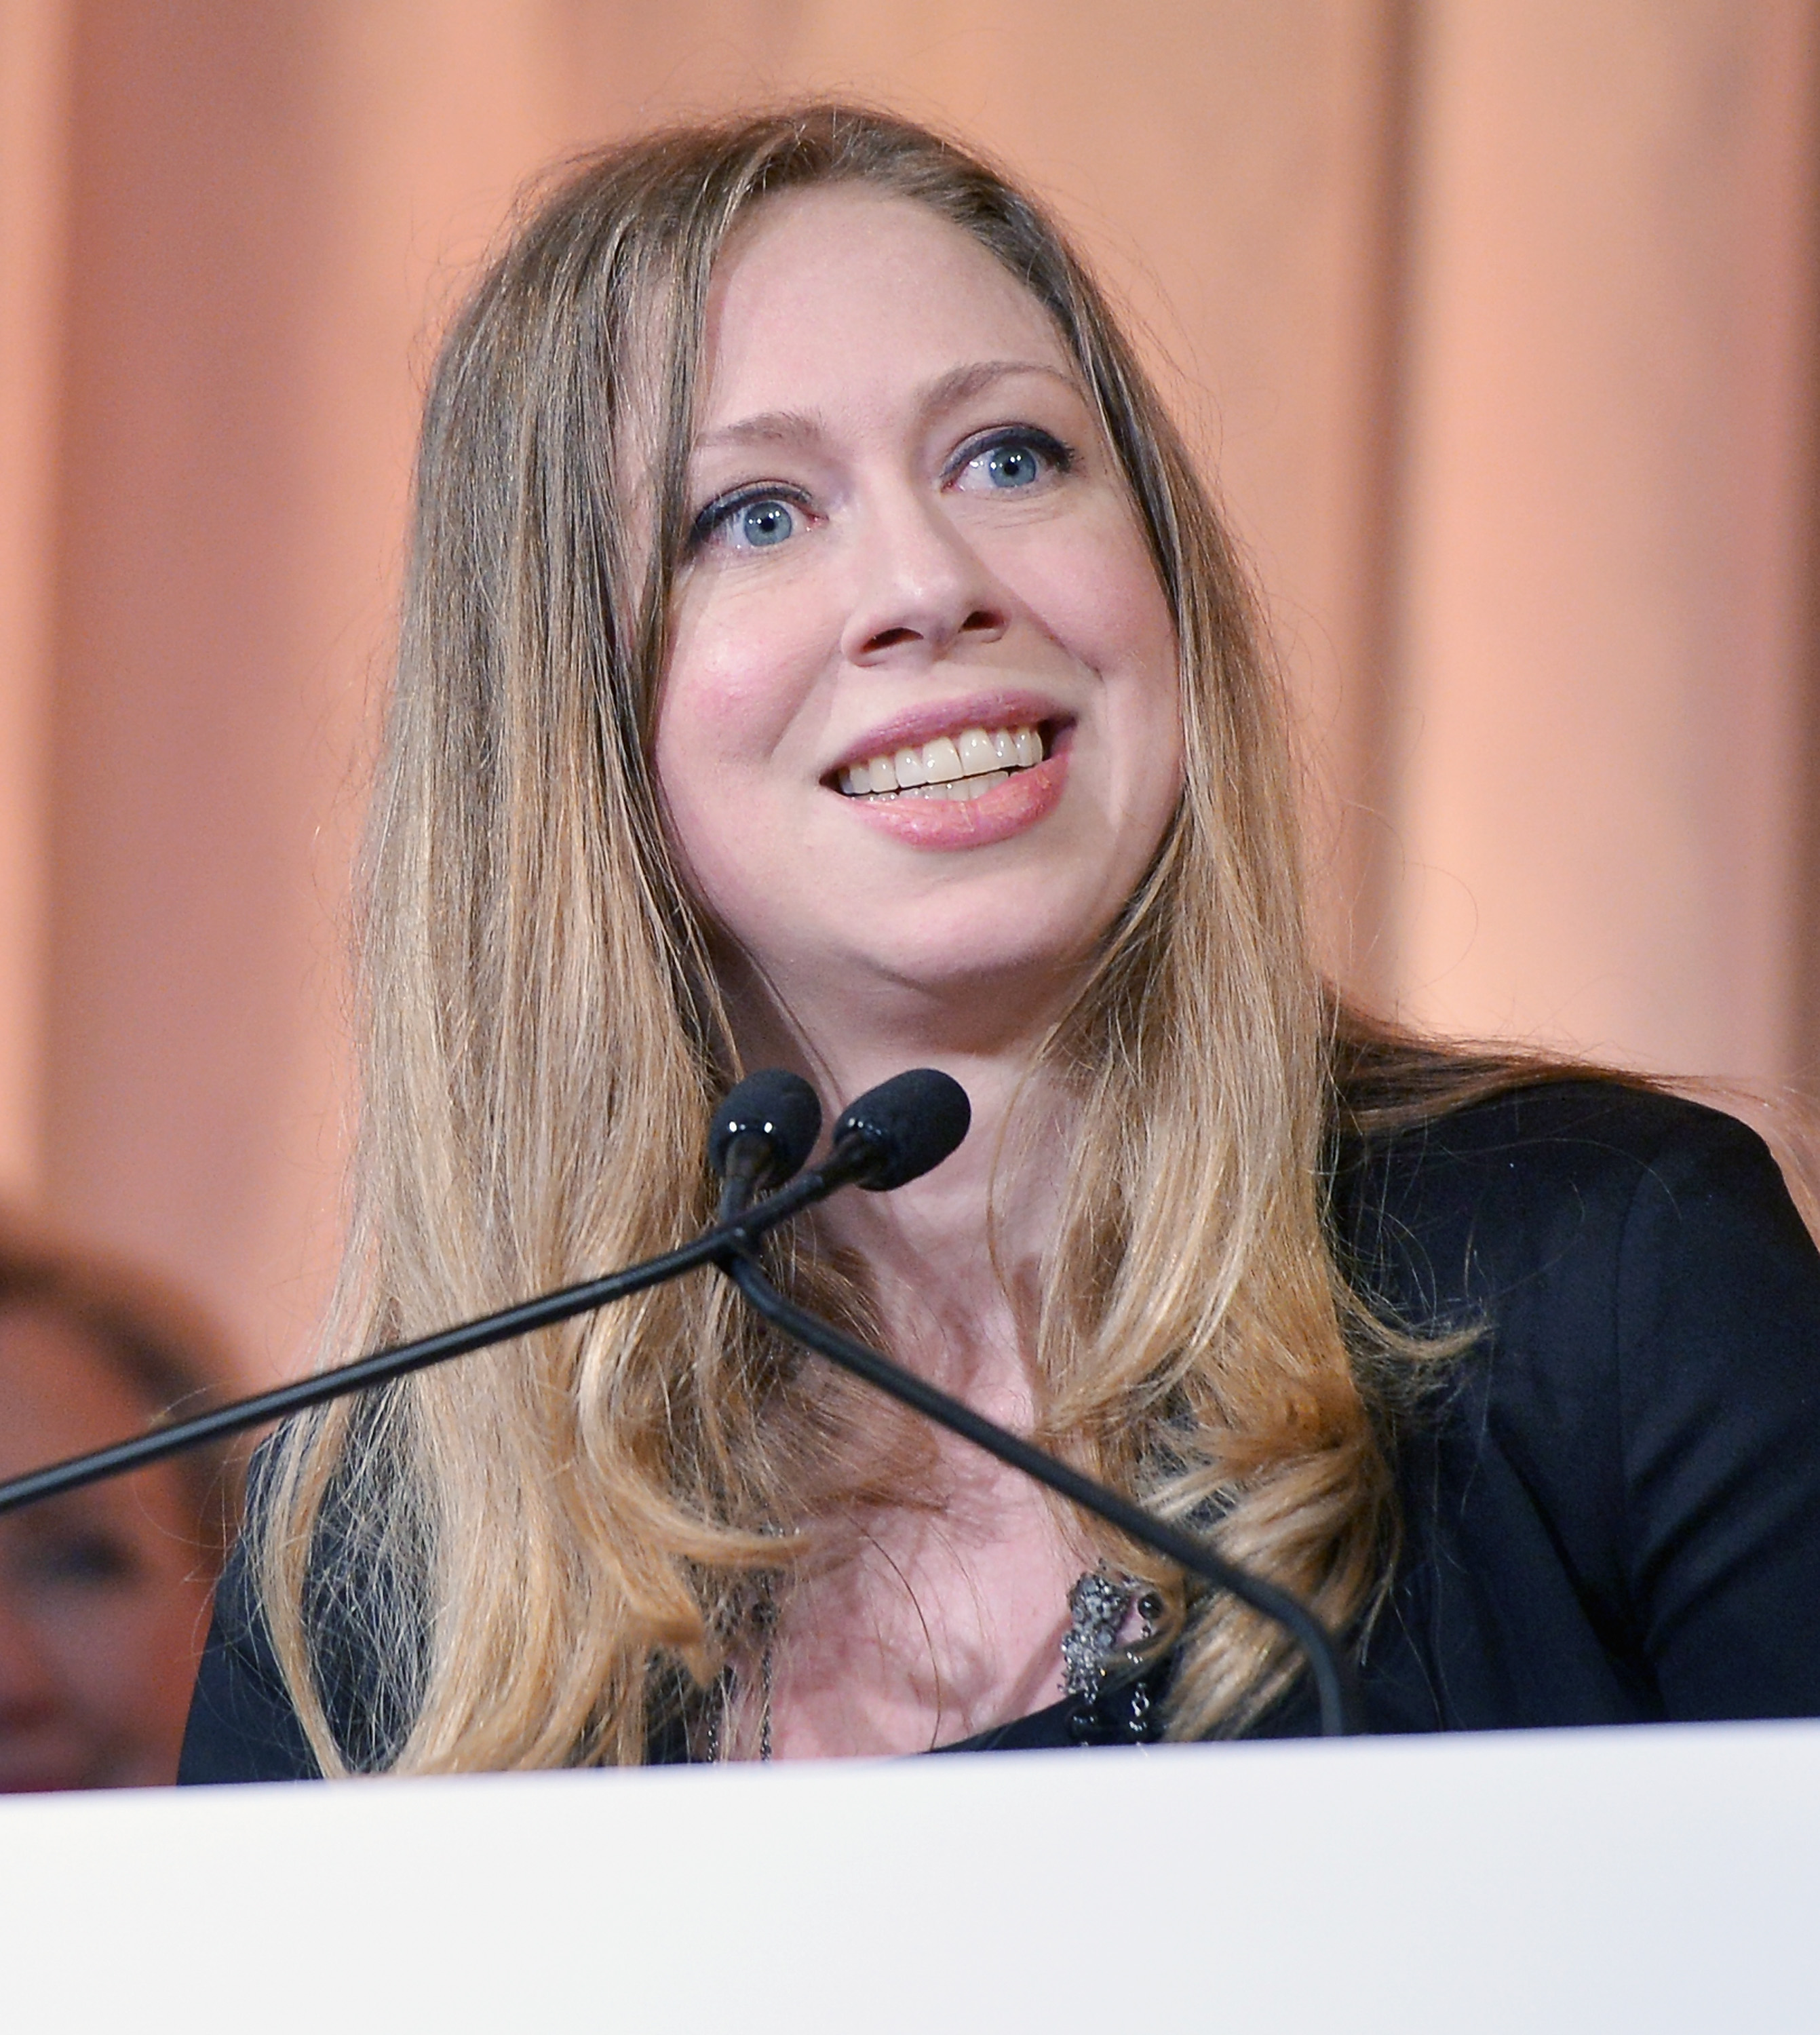 Chelsea Clinton rakes in $75K for speaking events